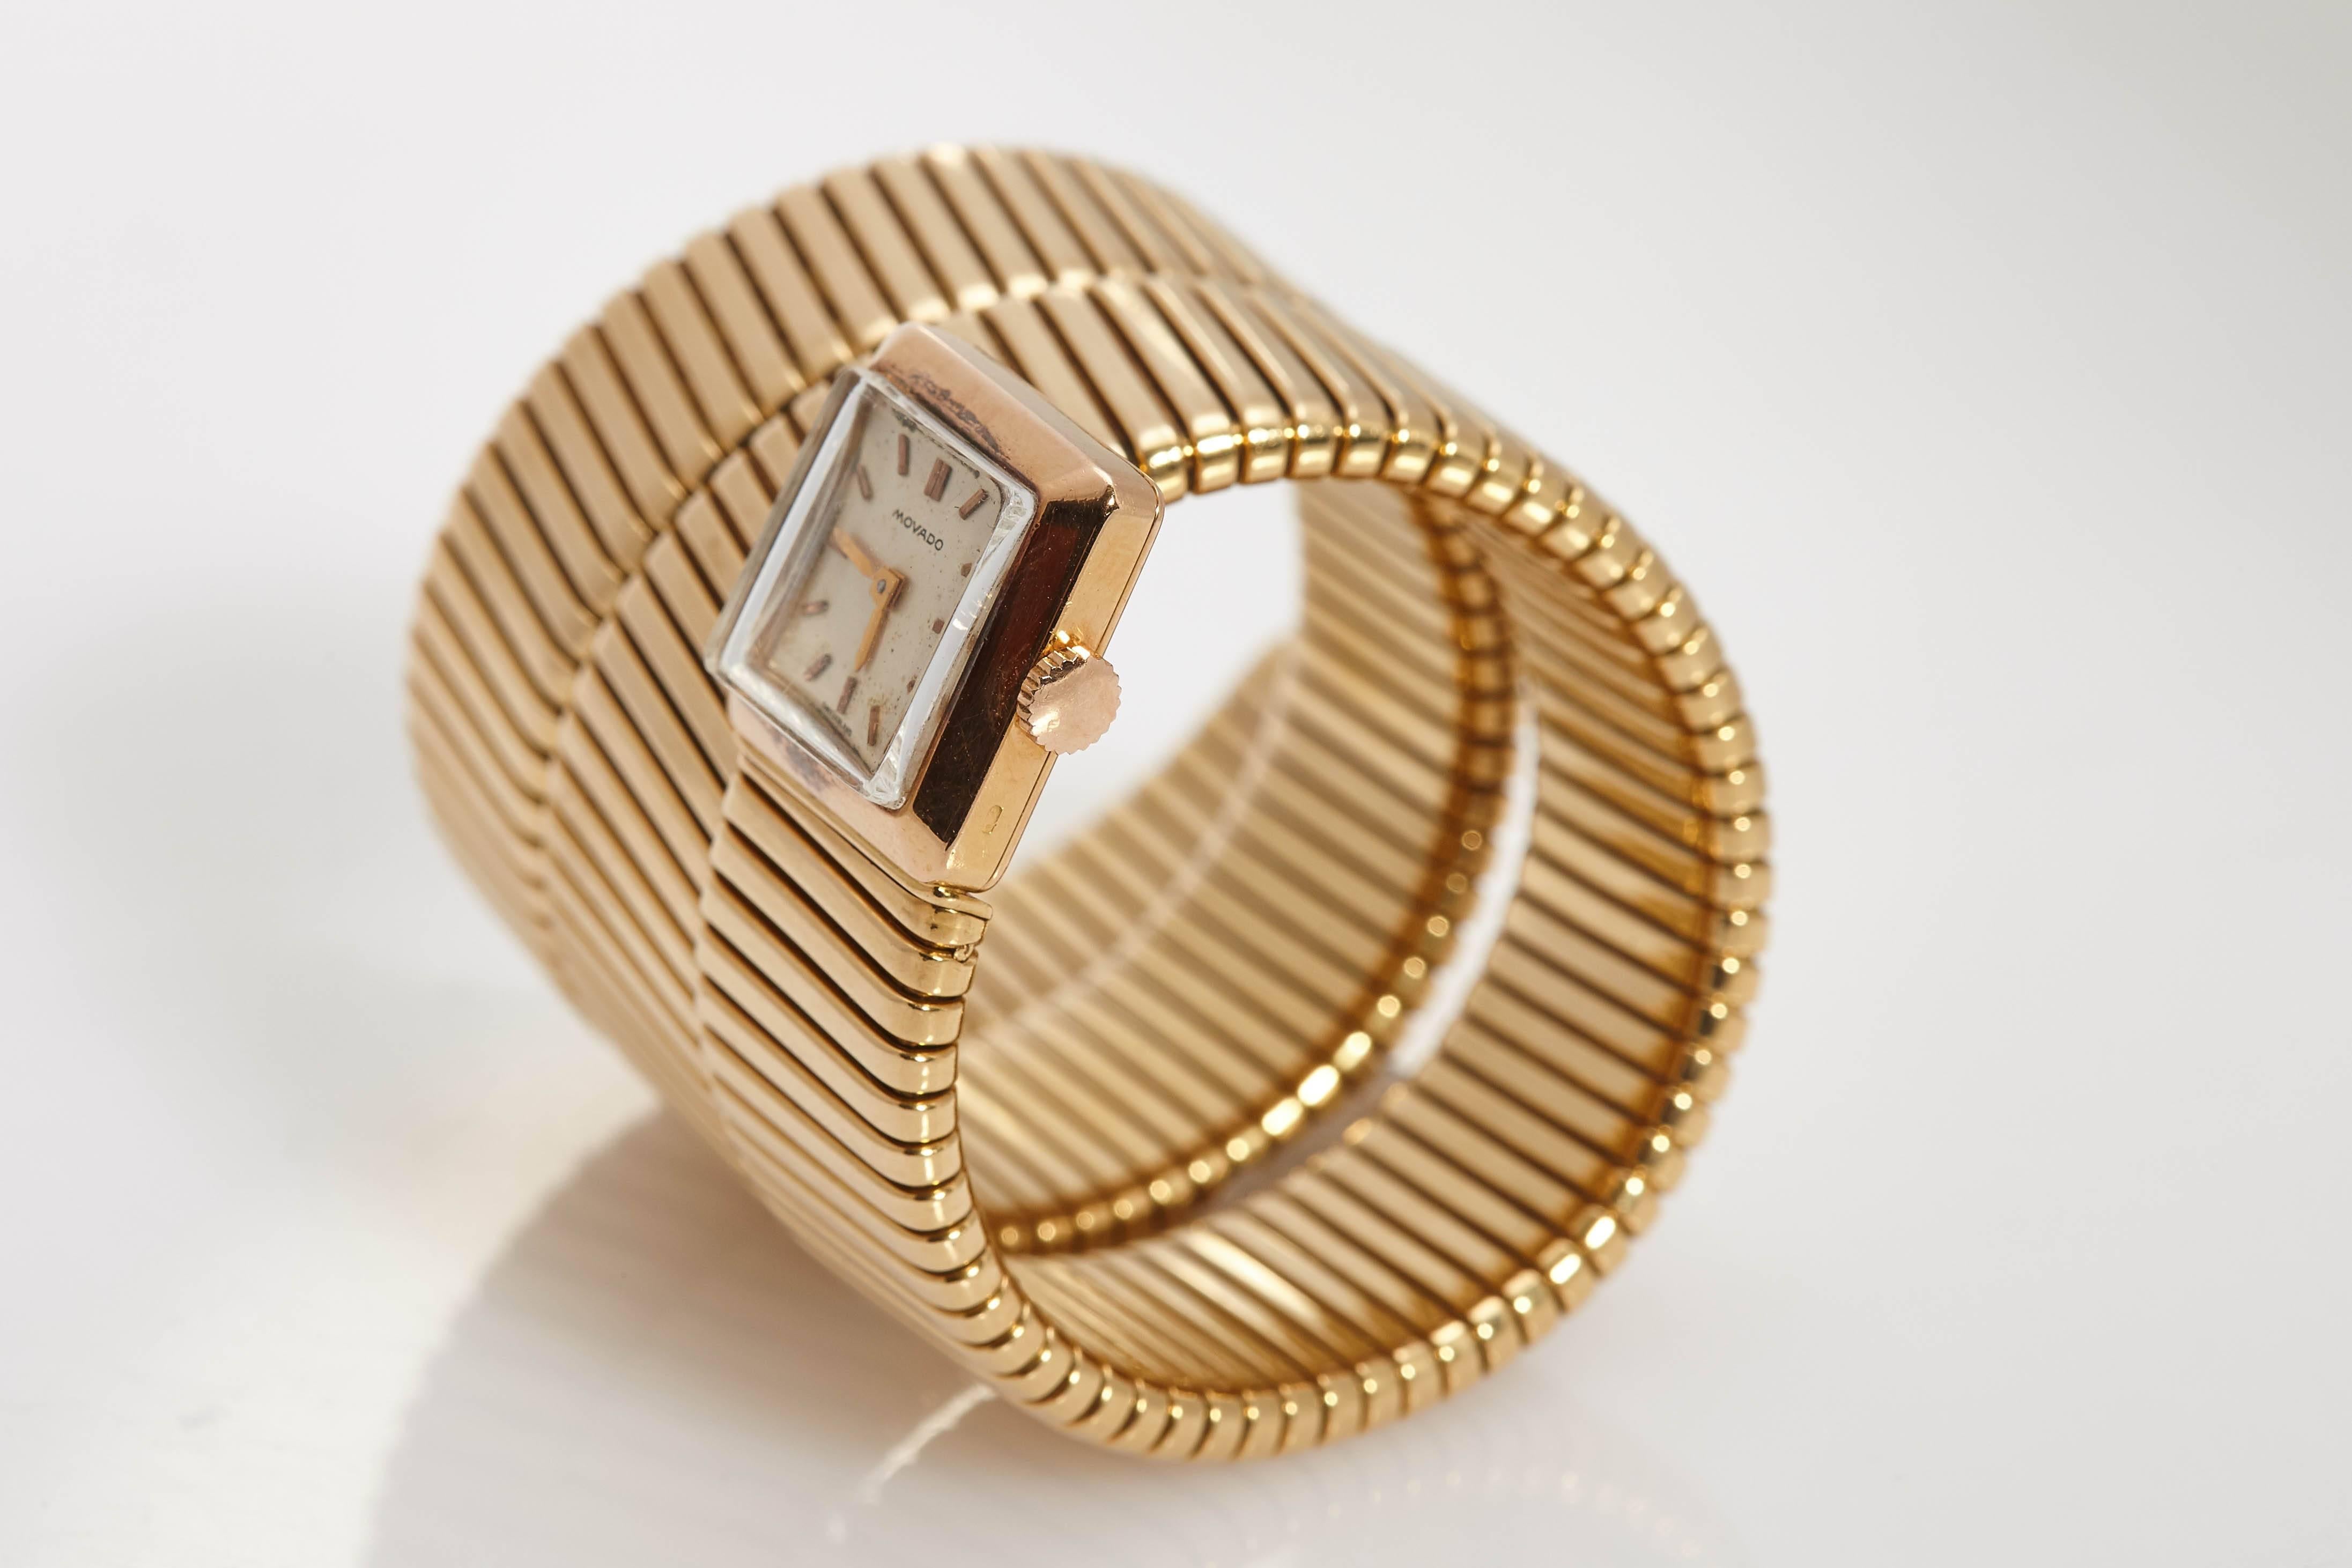 An unusually large version of the everlasting Bulgari Tubogas lady's watch-bracelet, carrying a Movado movement. Mounted in 18kt yellow gold. Made in Italy, circa 1965.